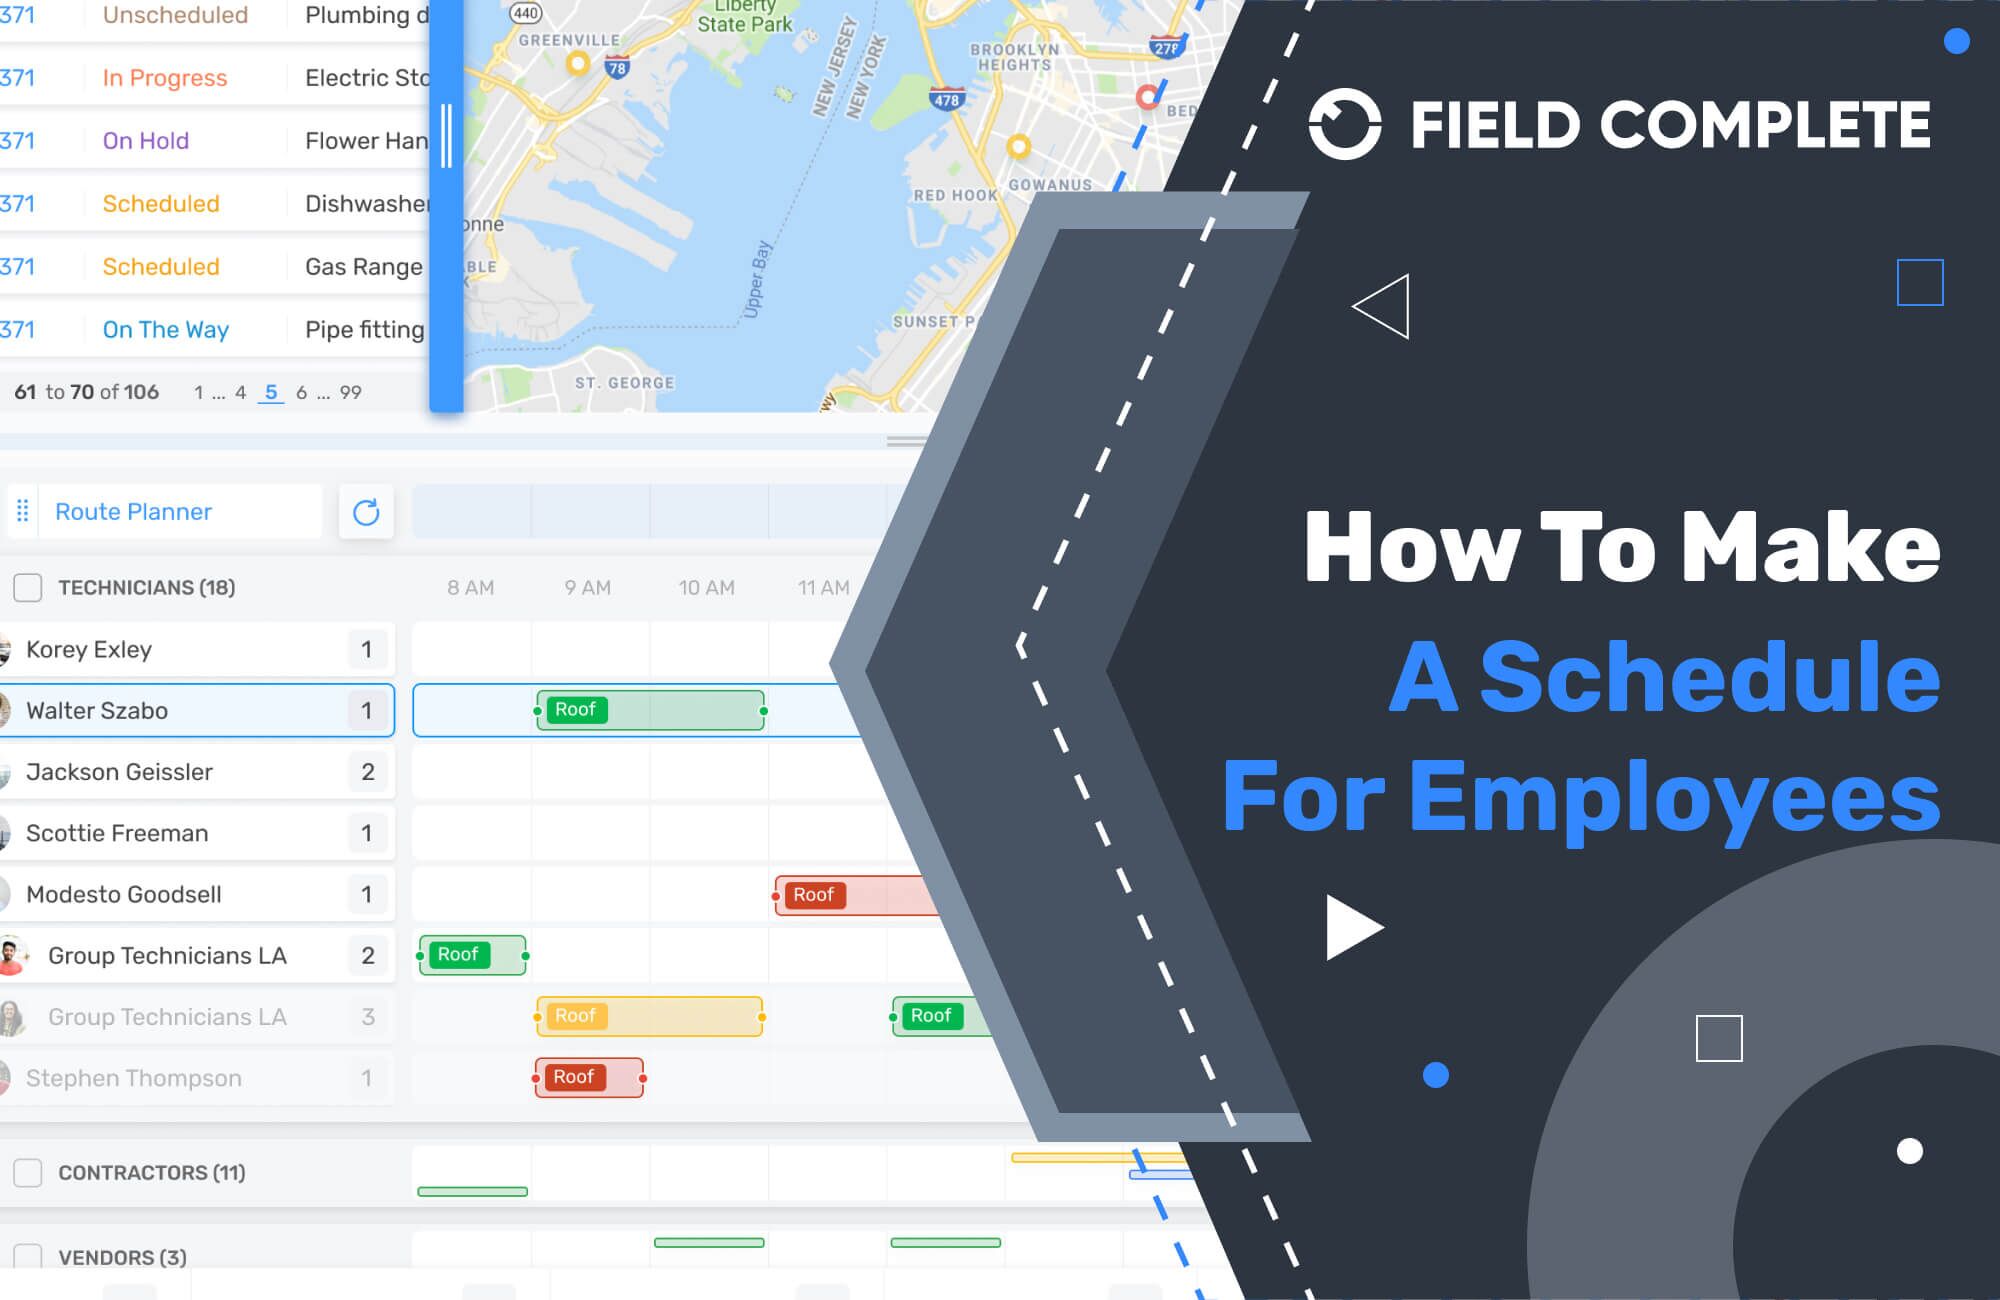 How to make a schedule for employees